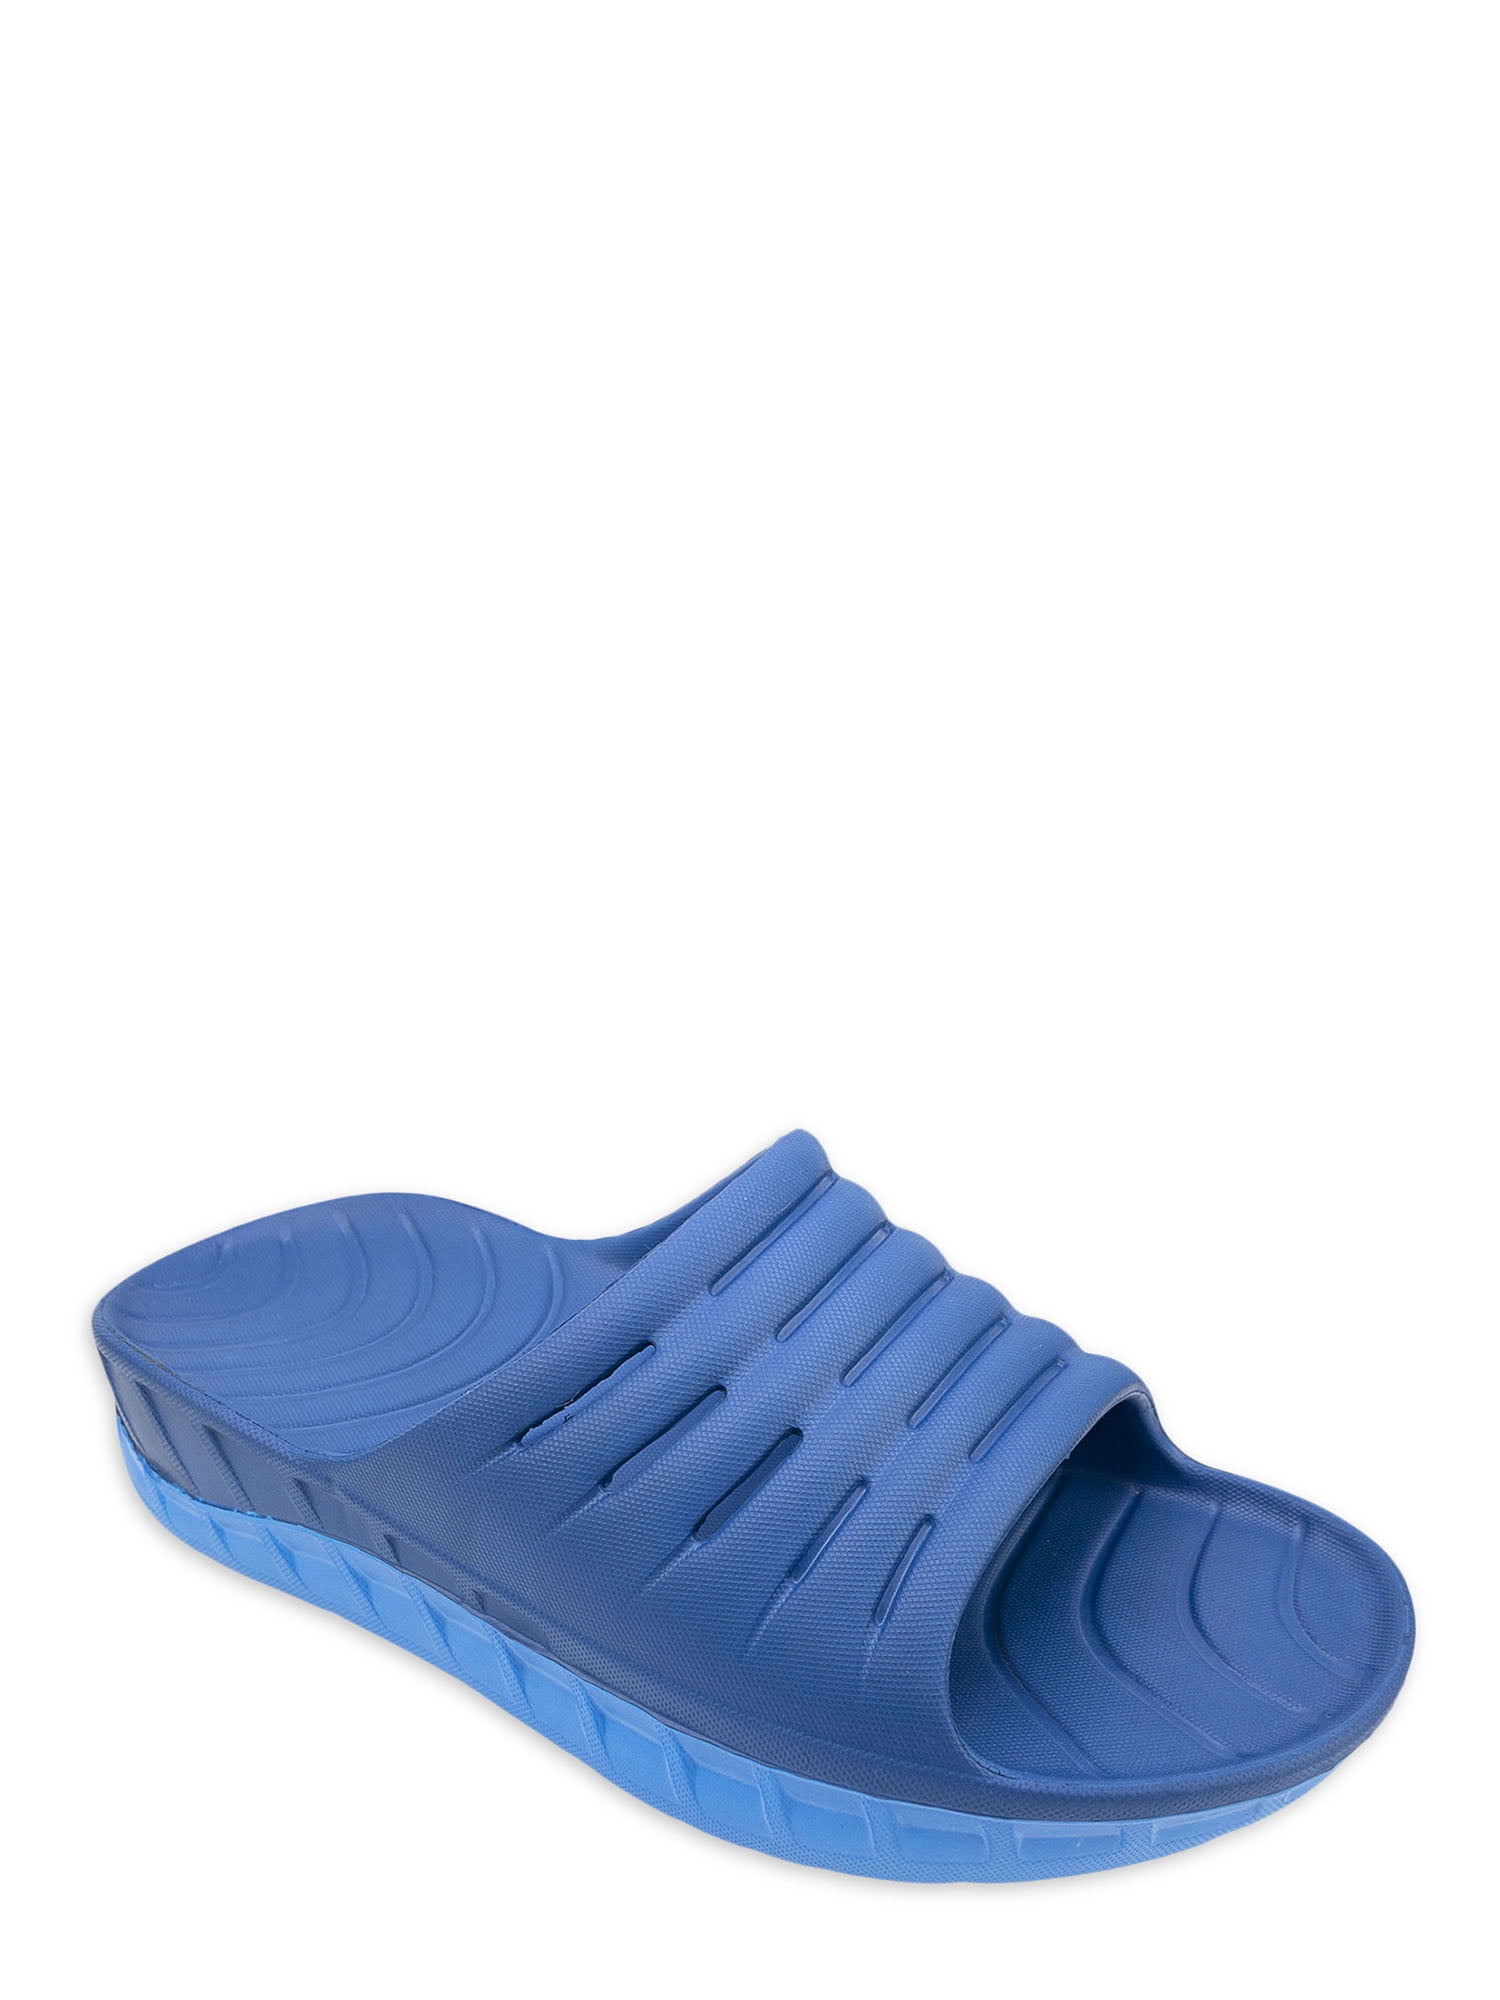 Athletic Works Recovery Cushion Comfort Slide Walmart.com